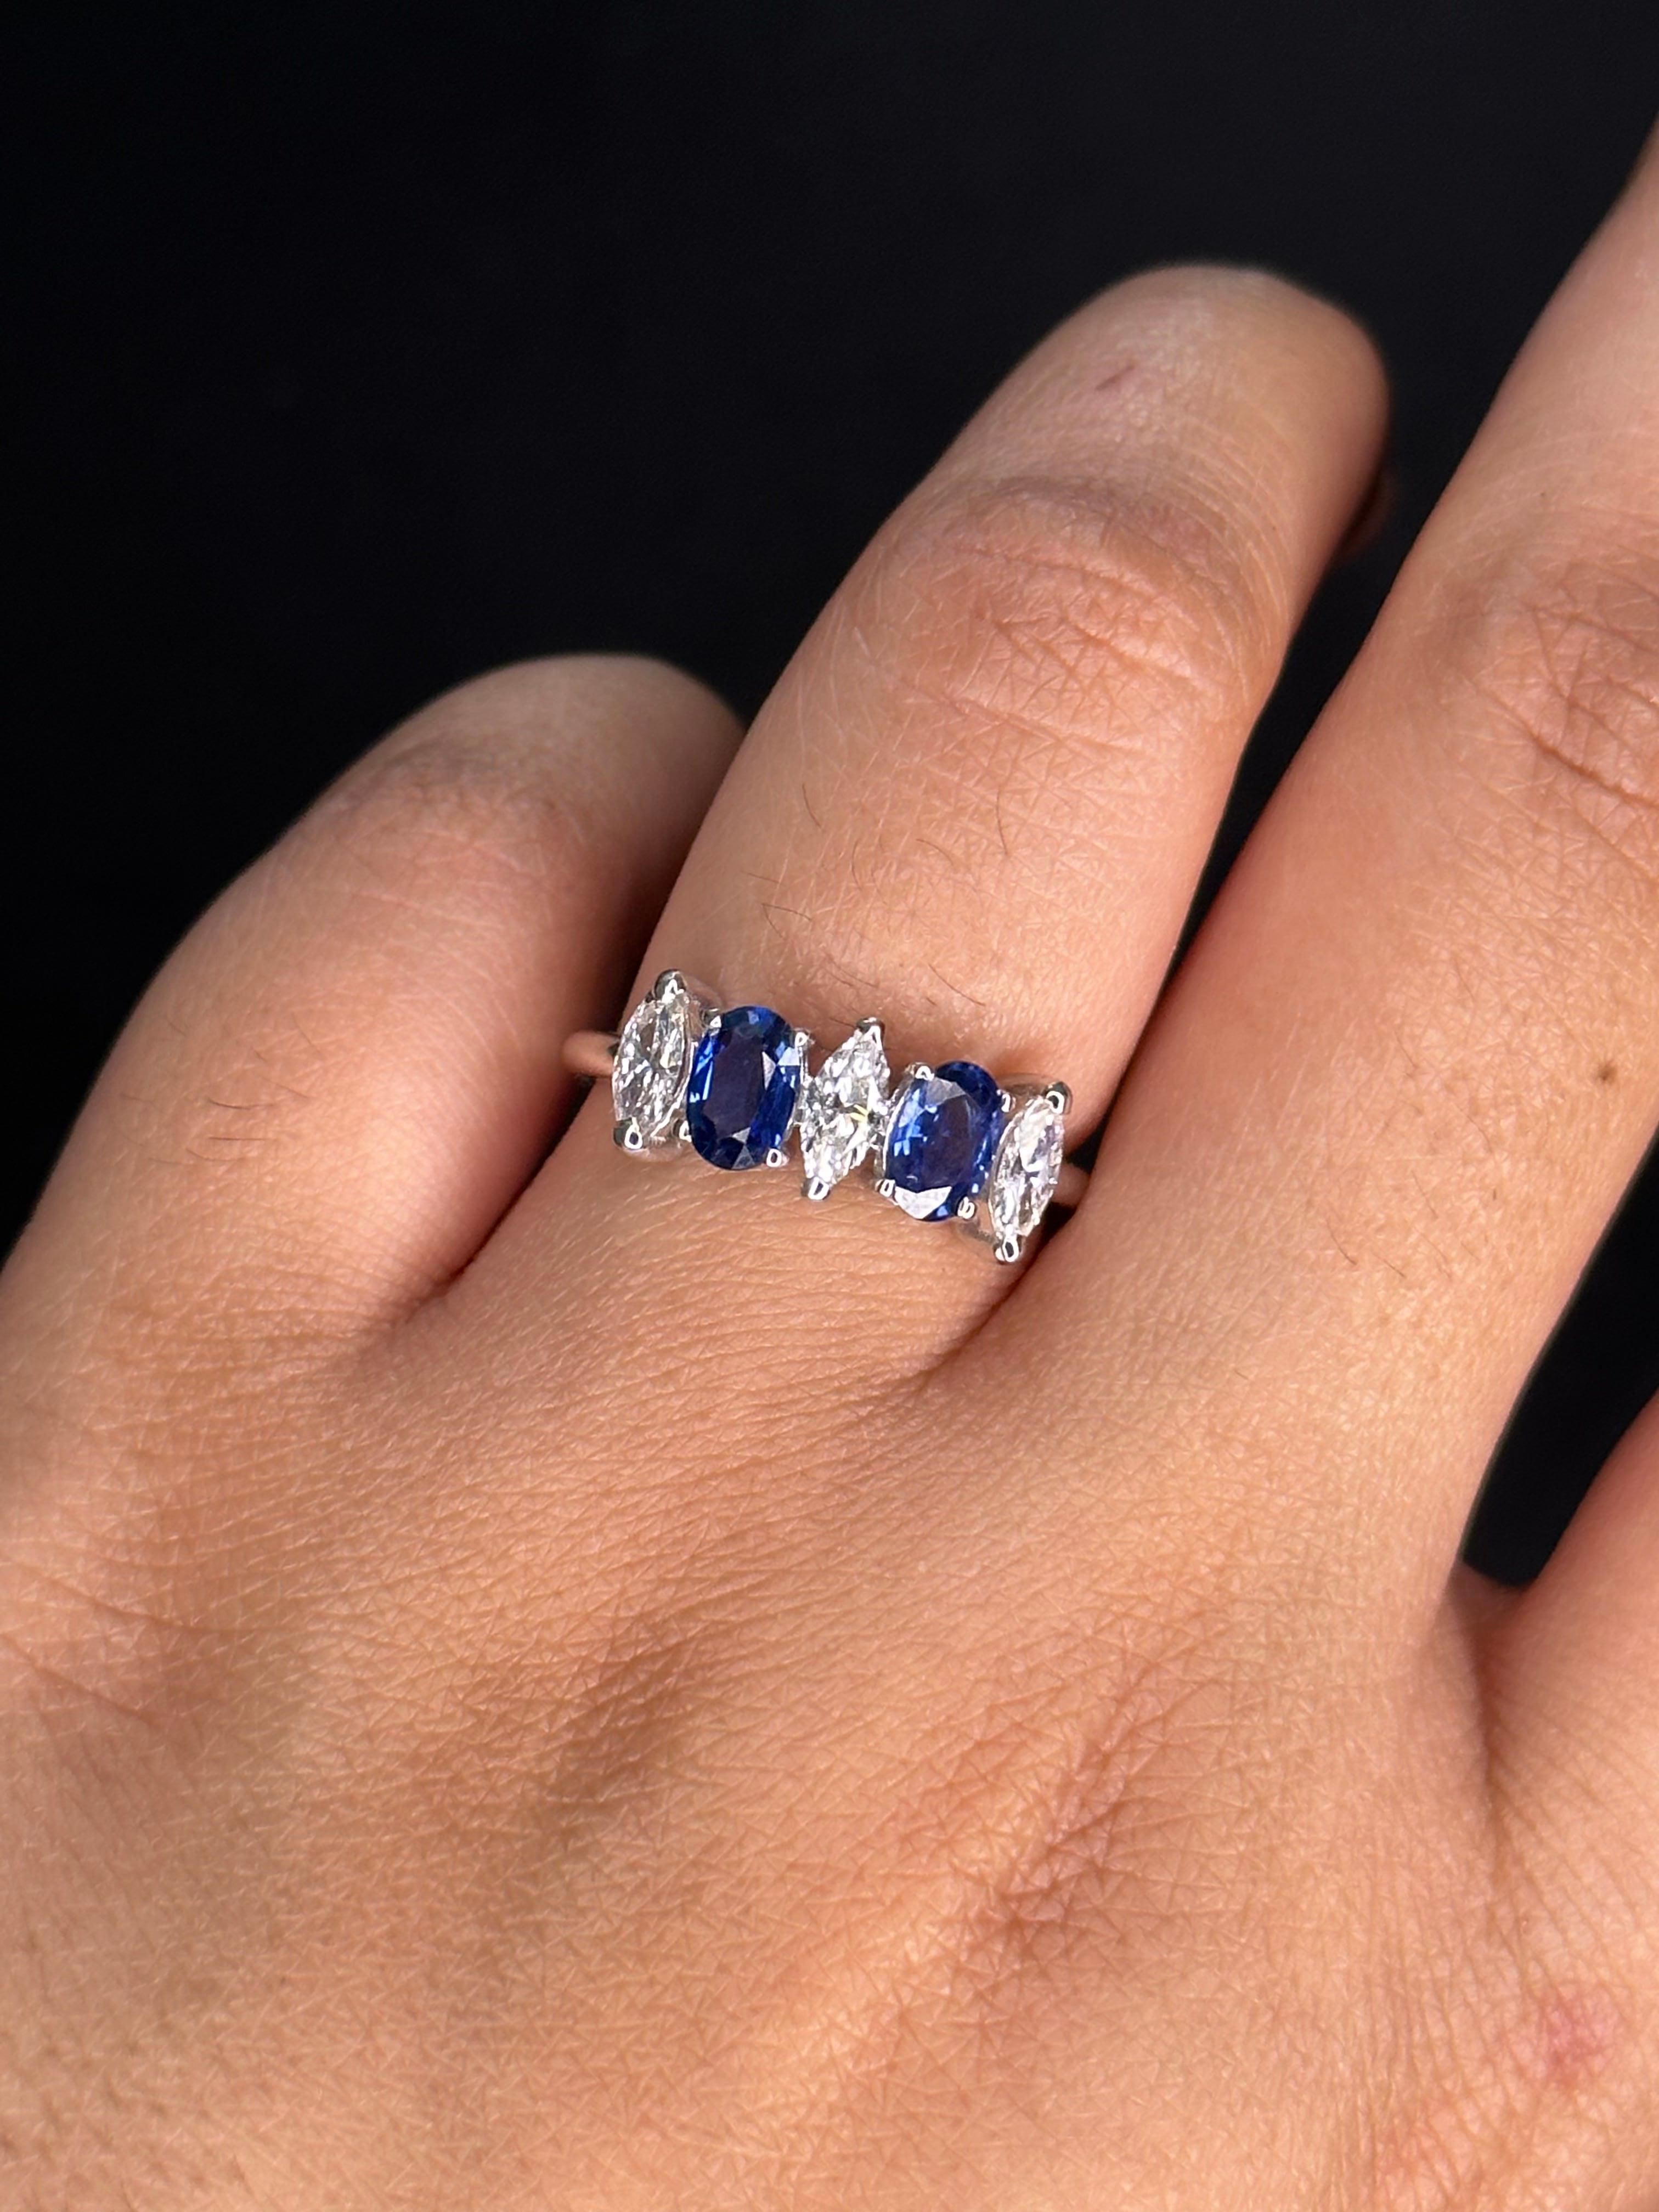 For Sale:  Stunning Diamond Blue Sapphire Engagement Ring For Her in Solid 18kt White Gold 7